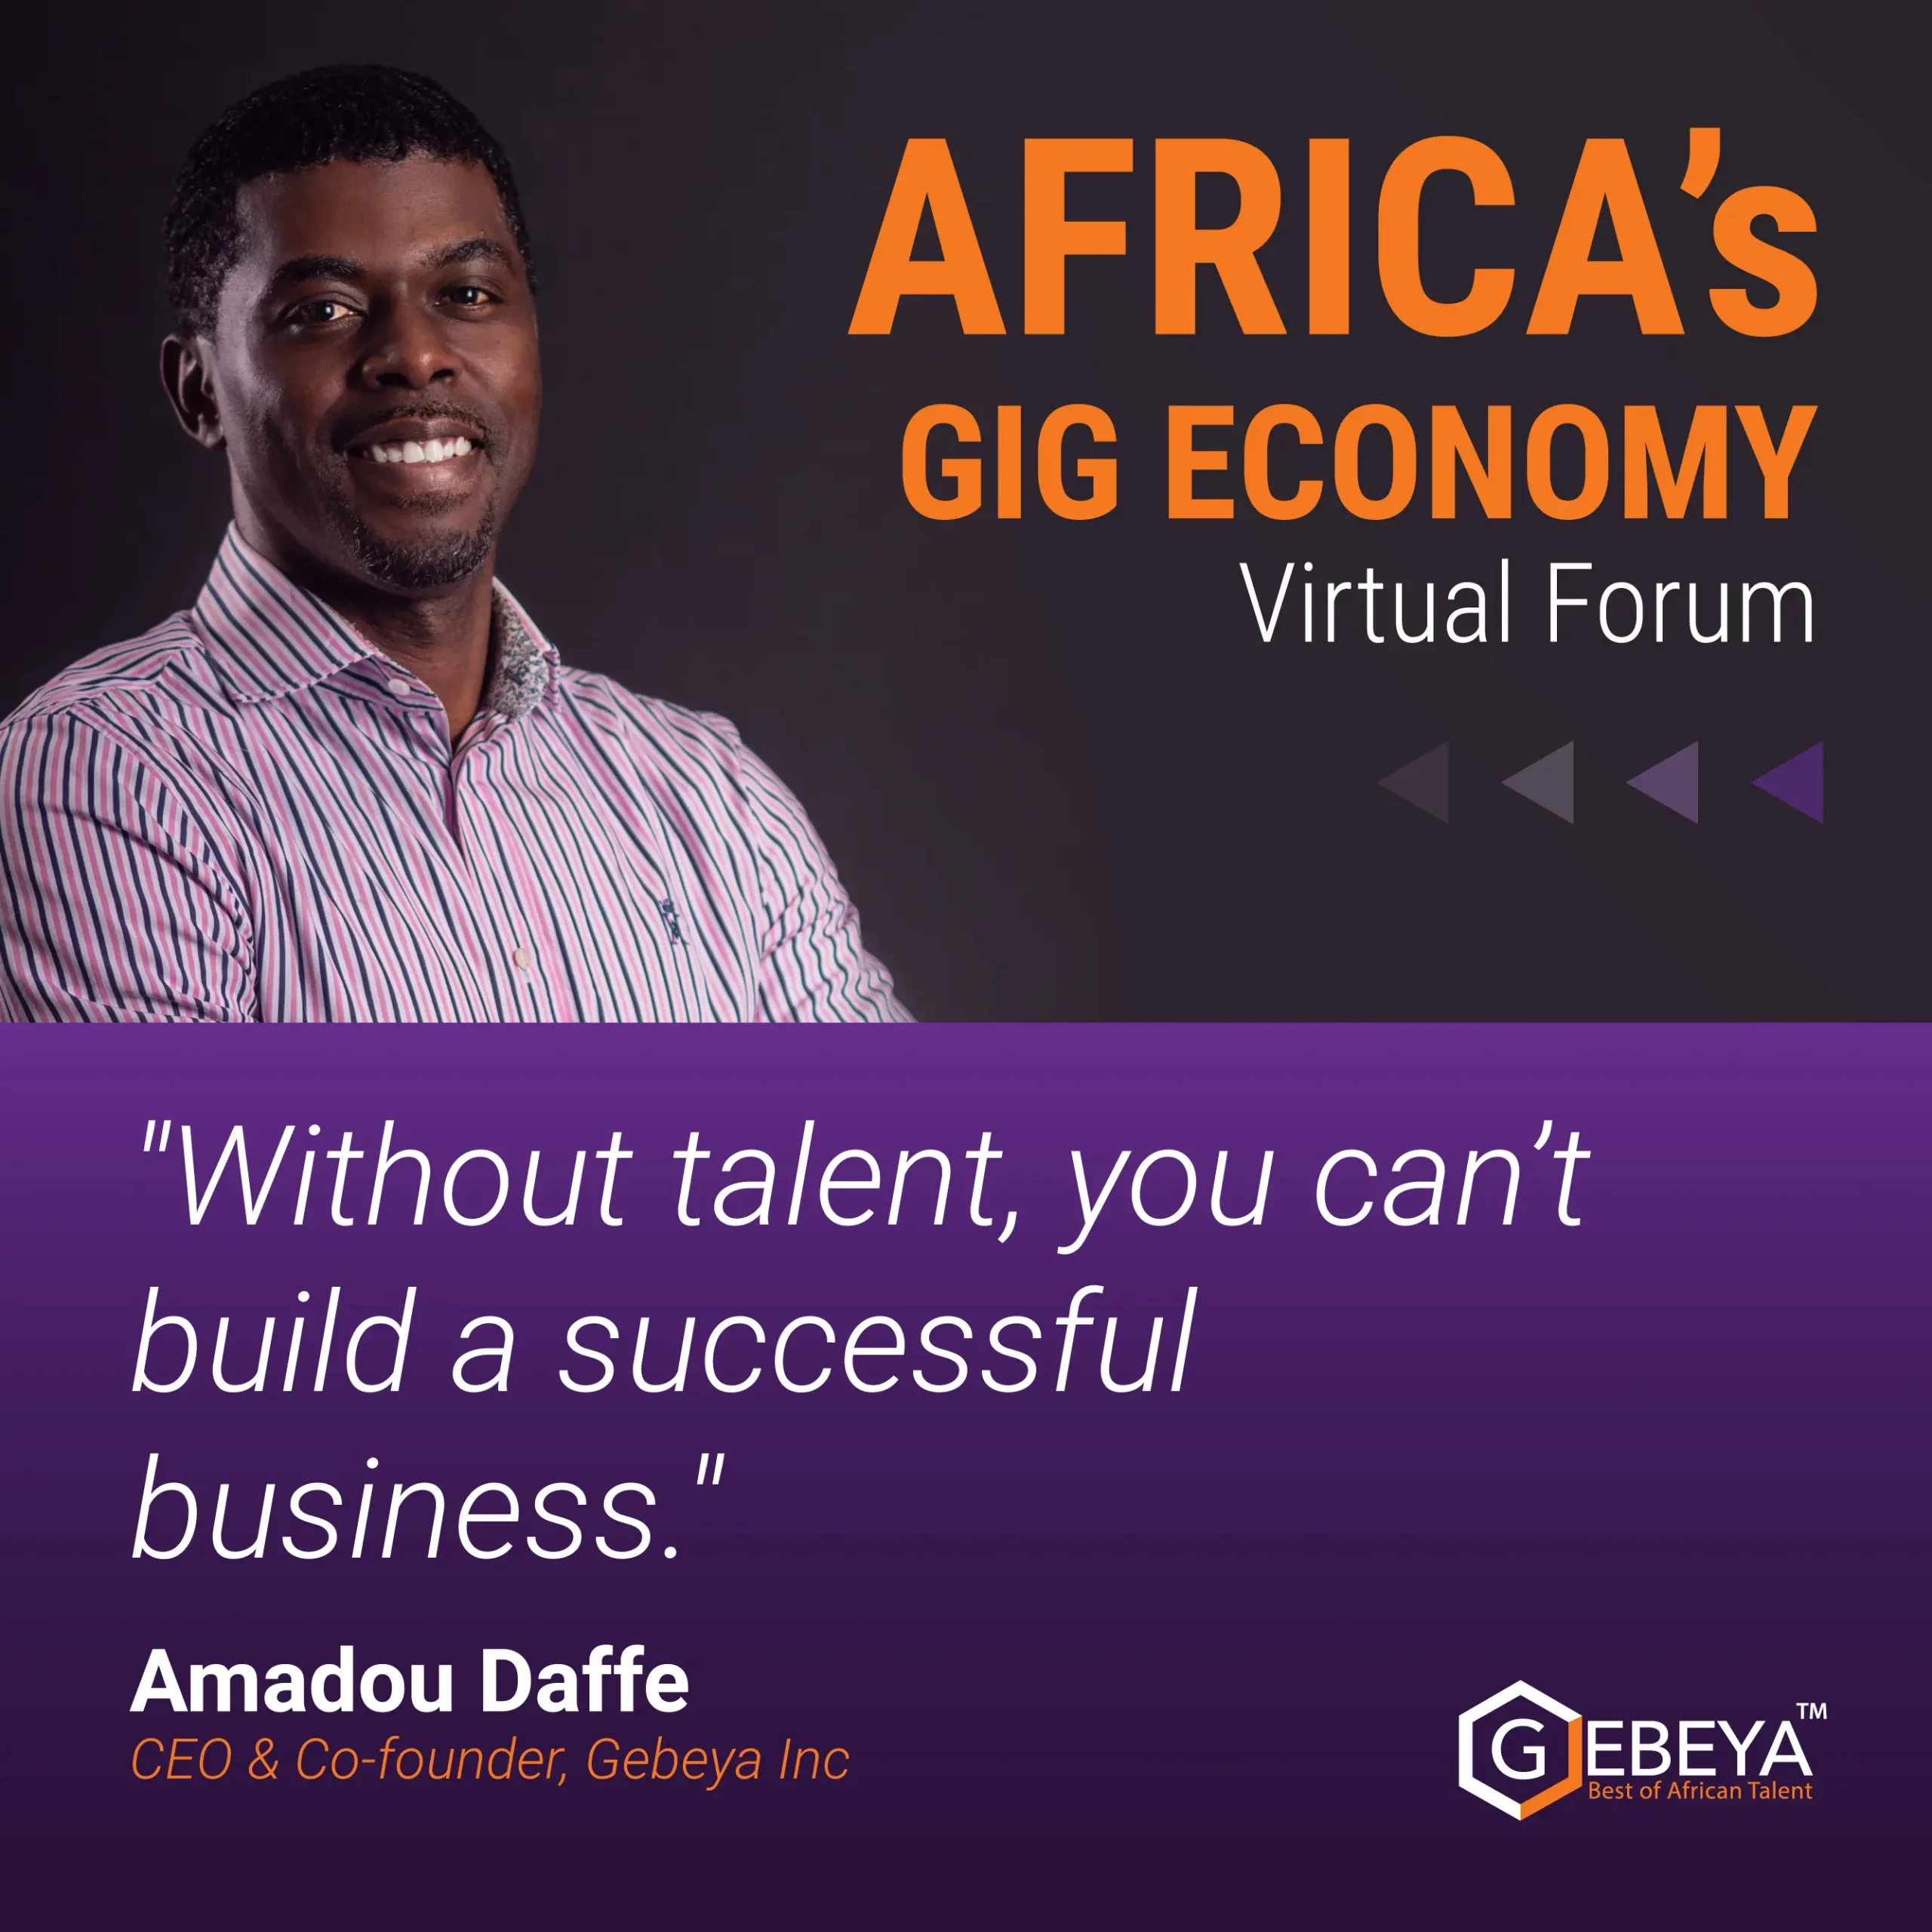 3 Keys To Growing The Gig Economy In Africa